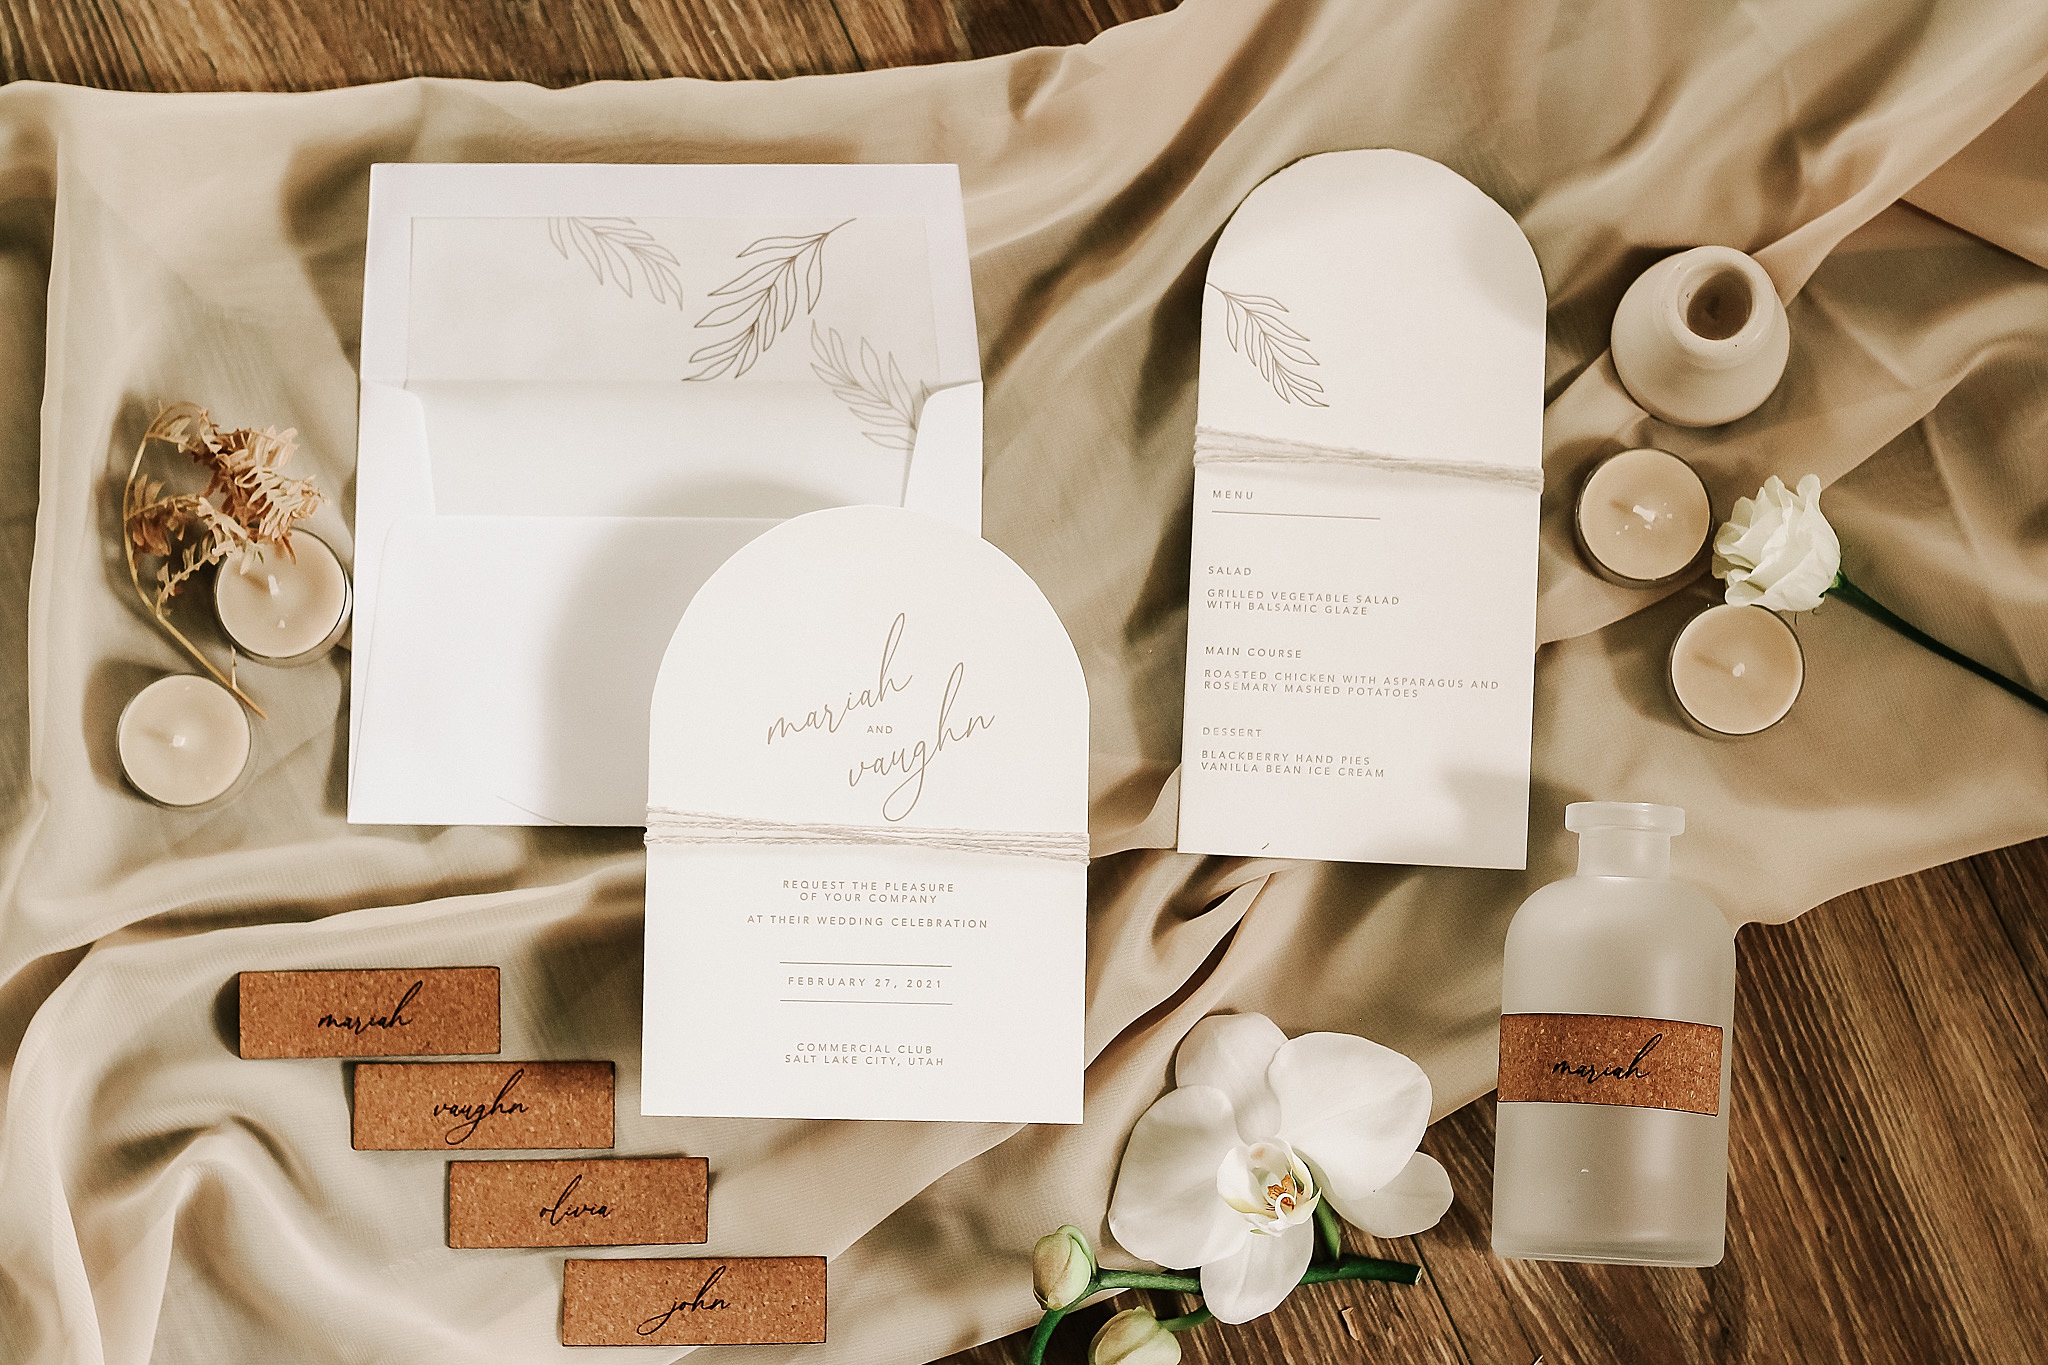 flat lay details at the wort hotel wedding venue taken by jackson hole wedding photographer adrian wayment.